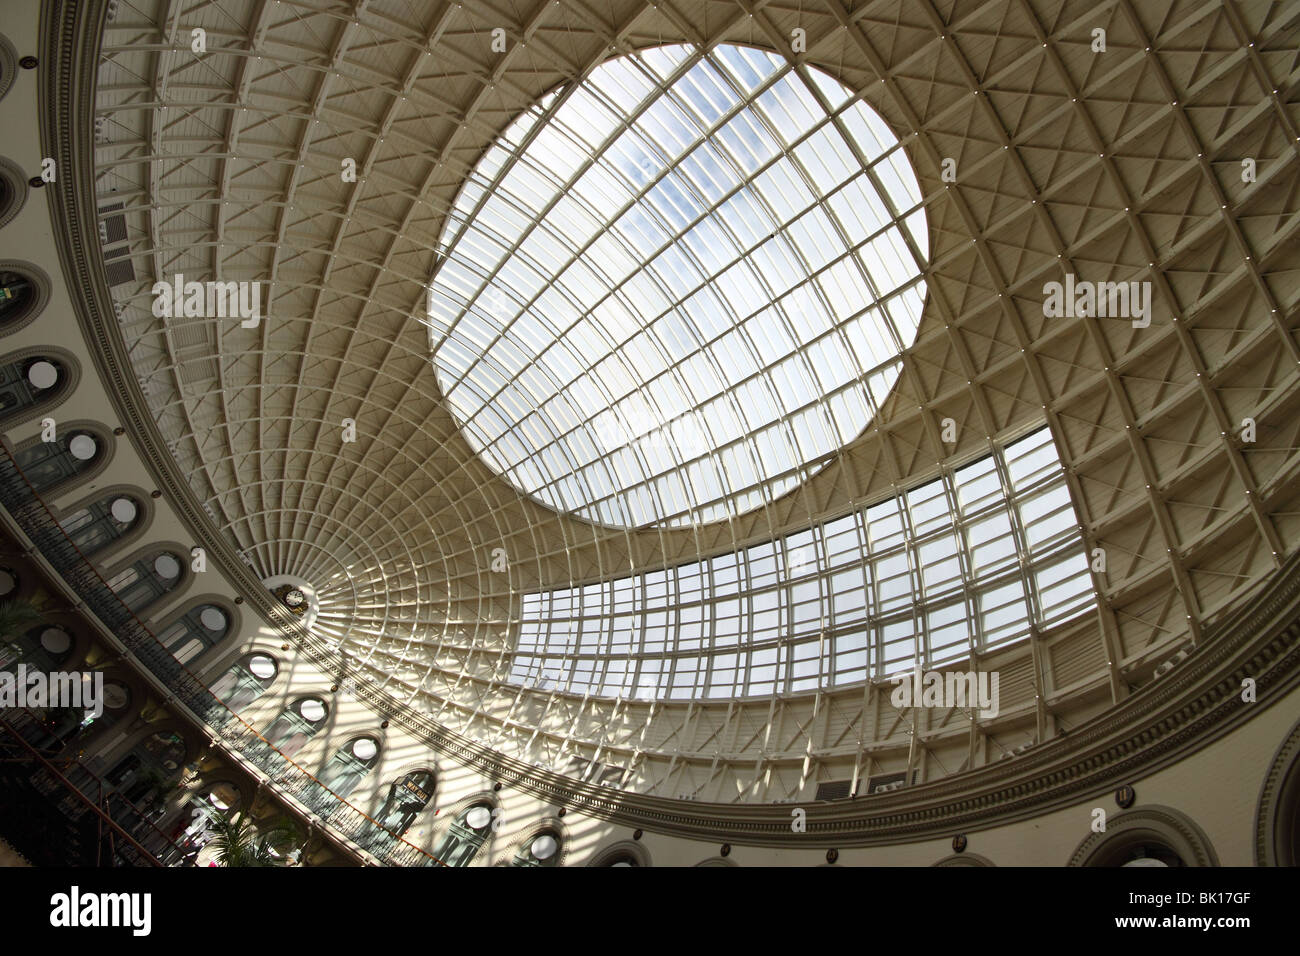 The impressive domed roof of the Corn Exchange, a grade 1 listed Victorian building in Leeds West Yorkshire Stock Photo